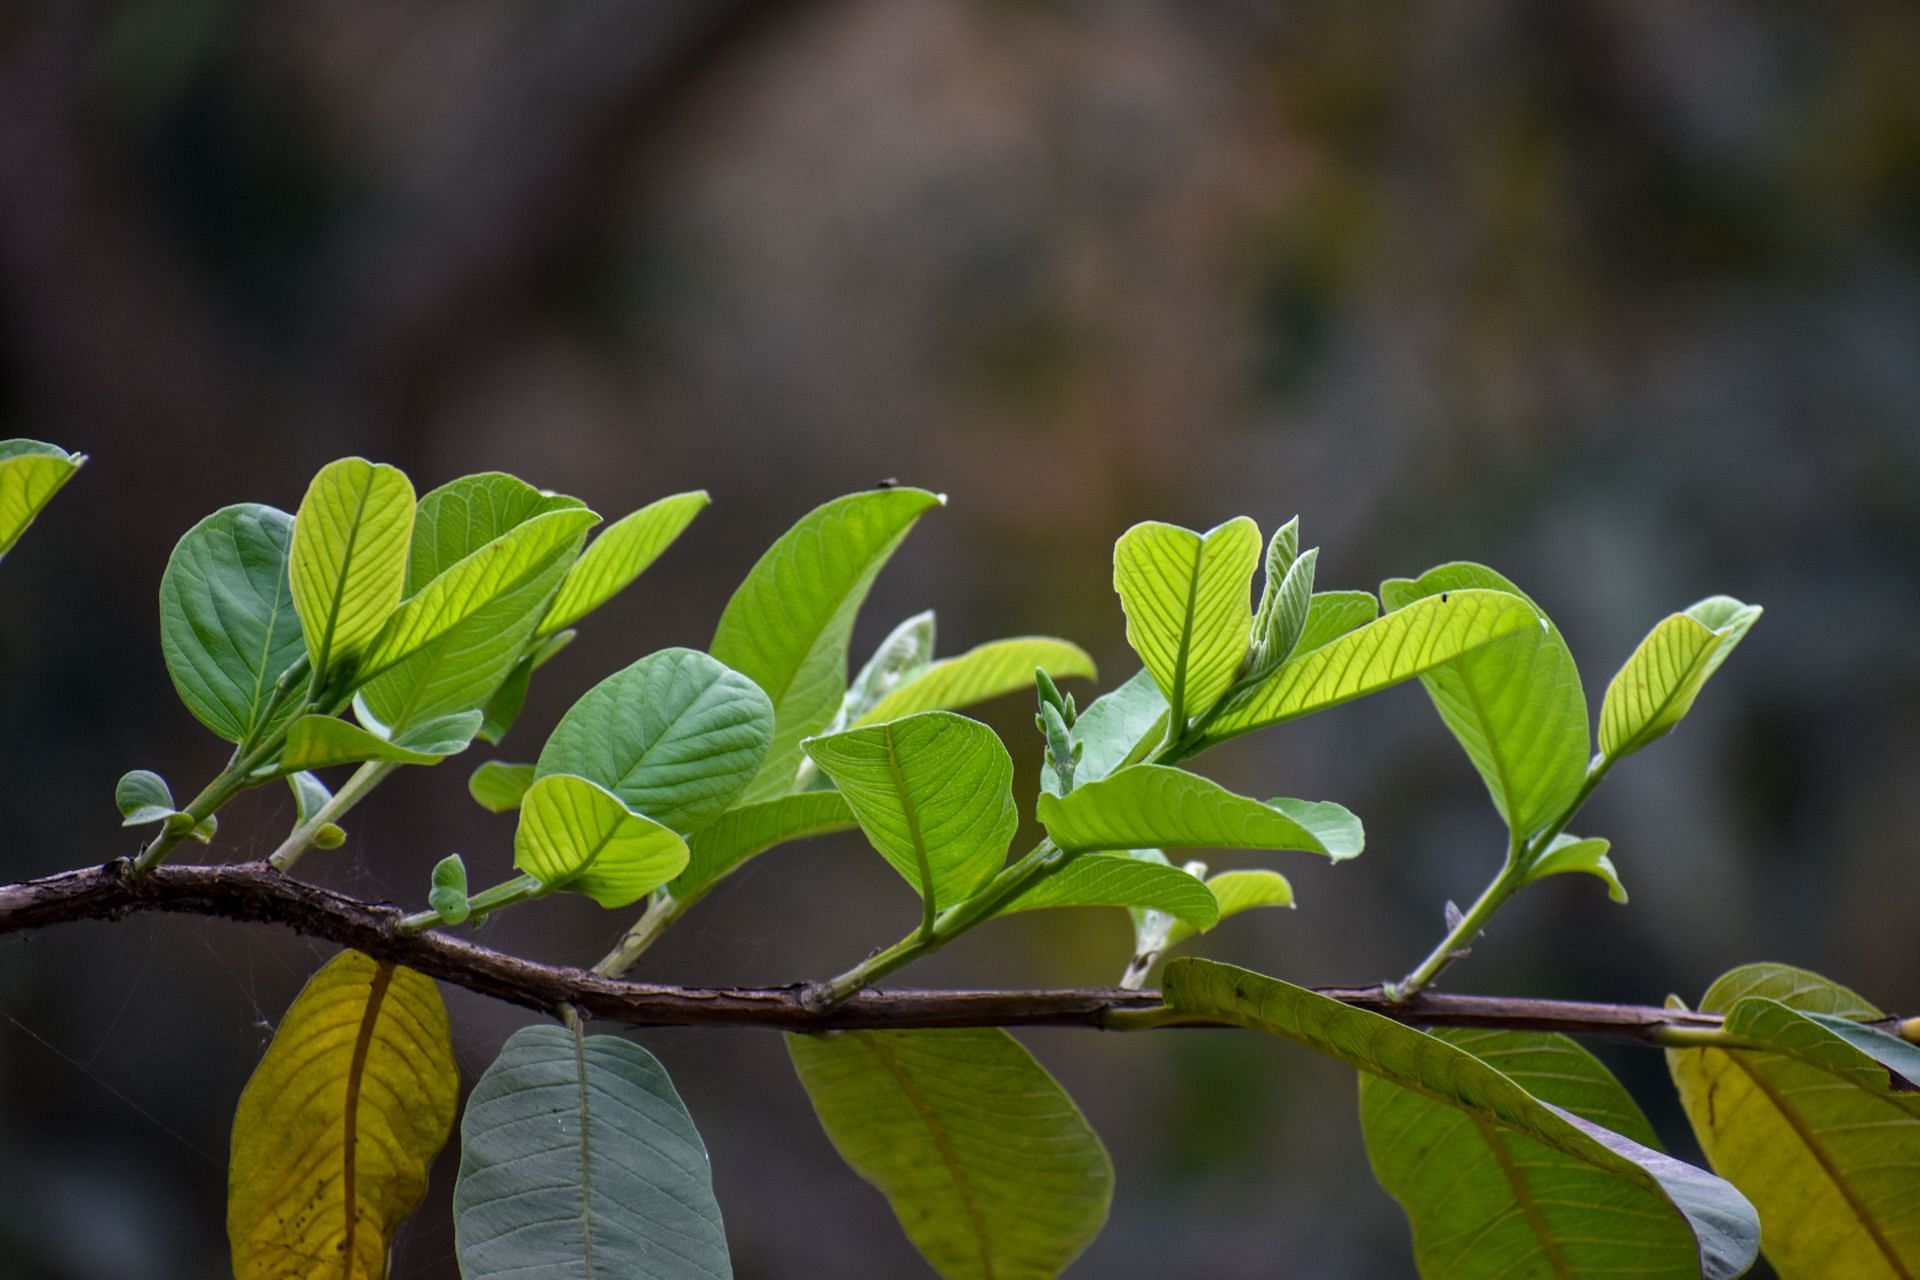 To get the benefits of guava leaves, you can chew these. (Image via Unsplash/ Parvej Alam)